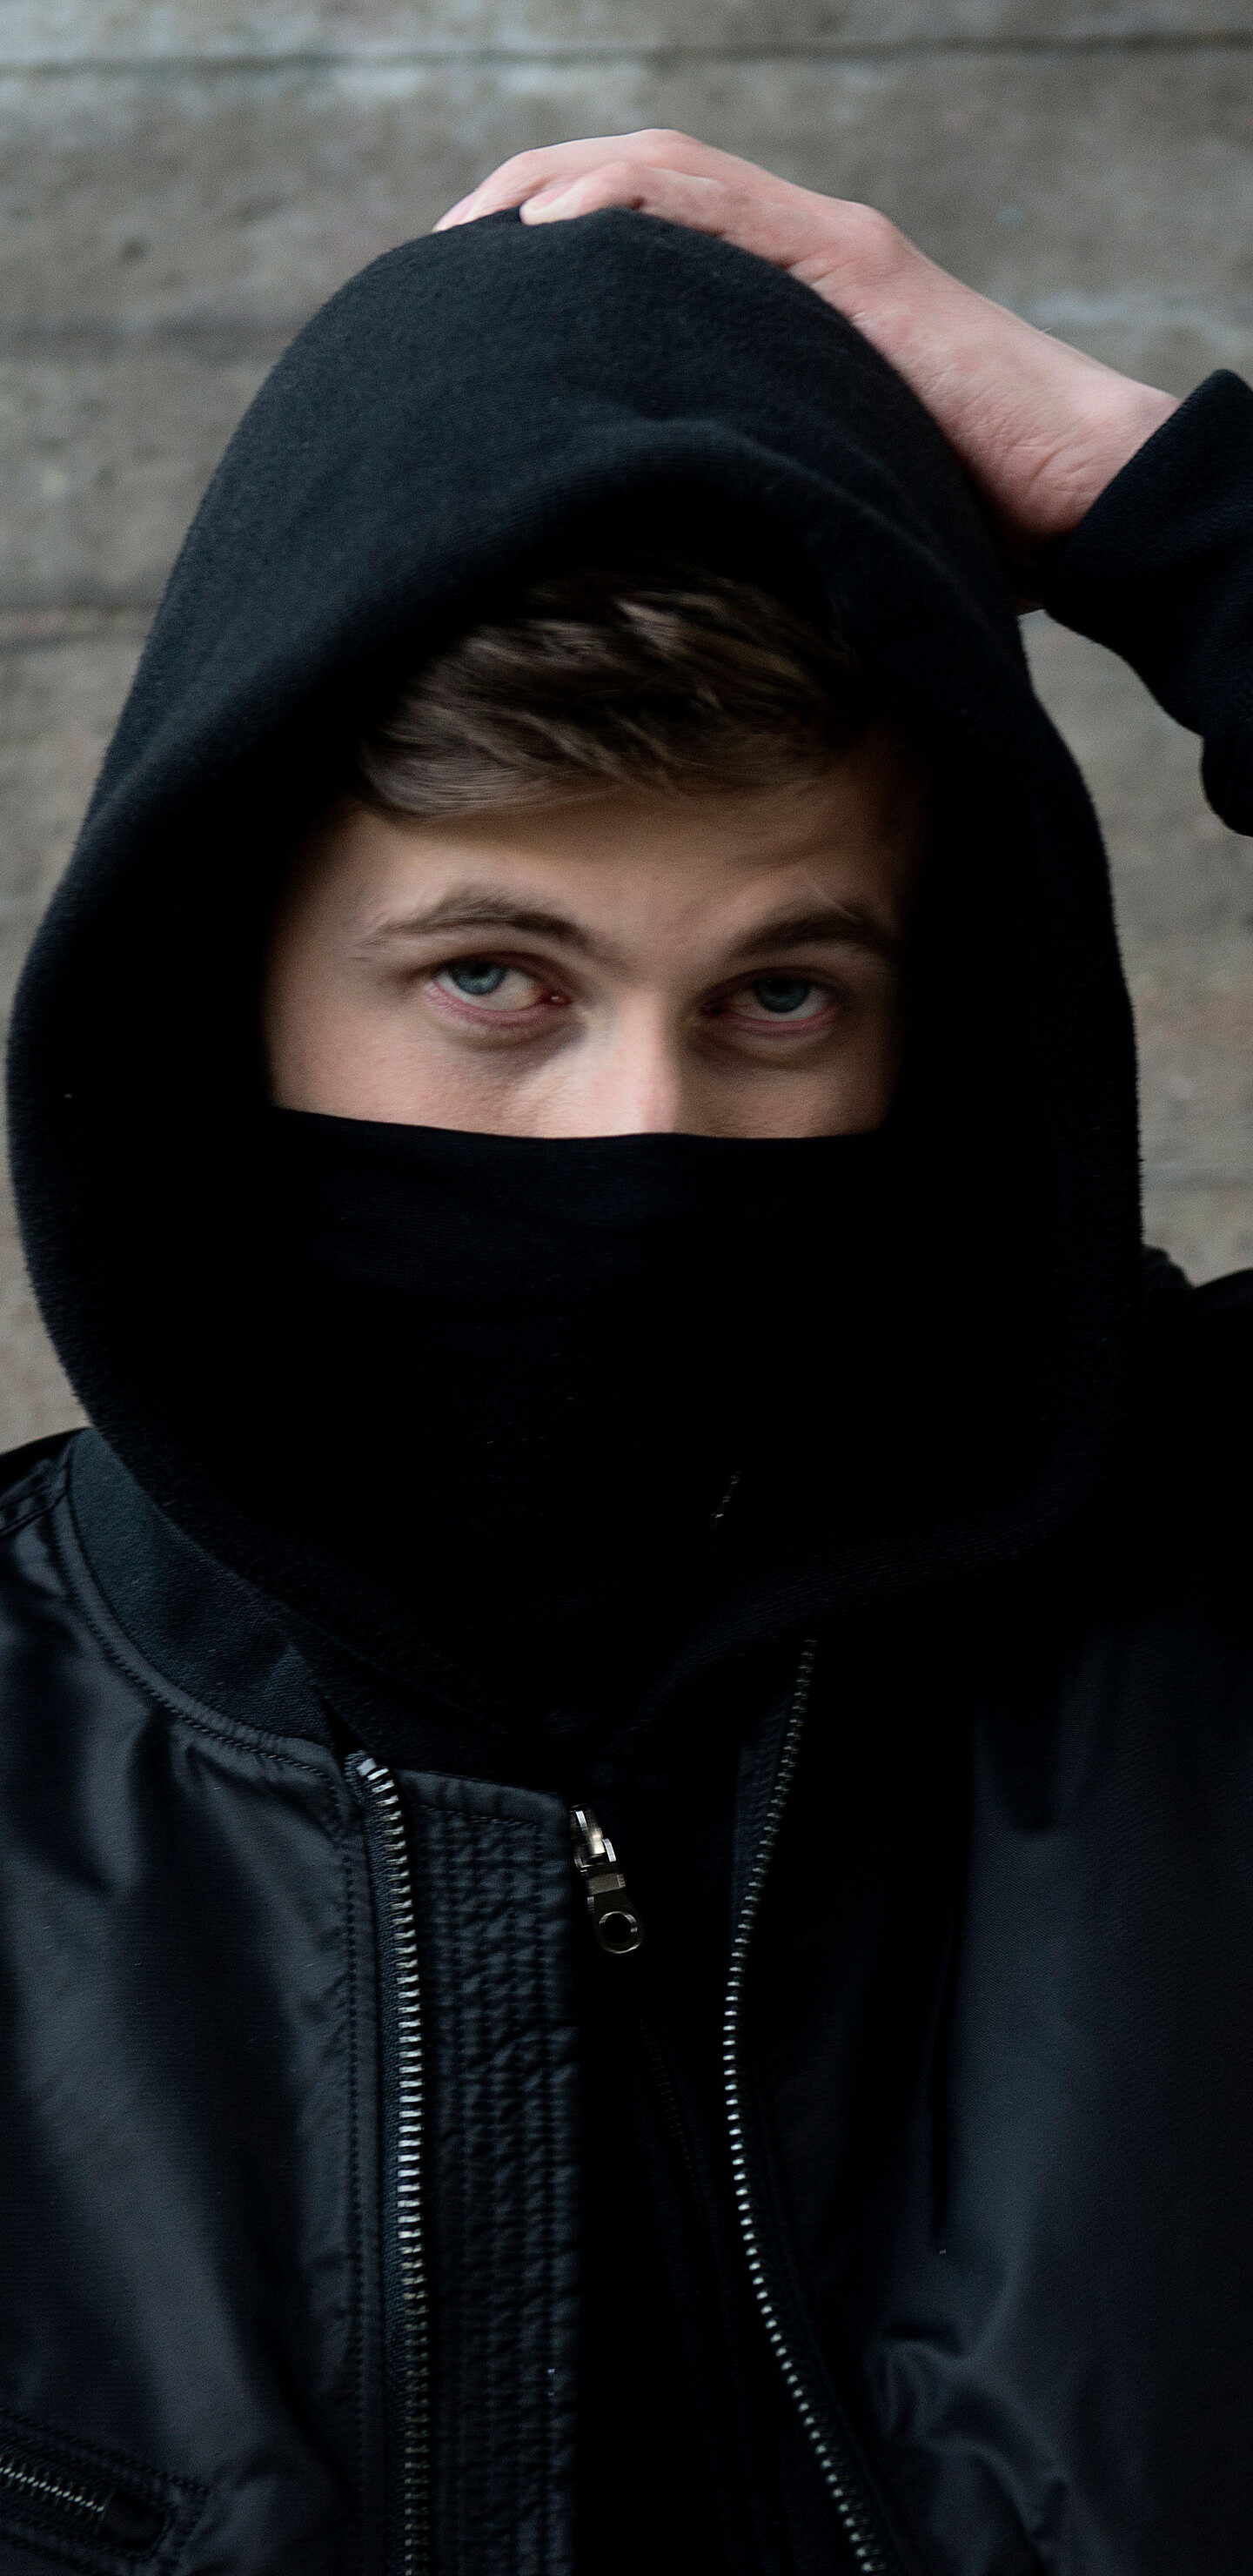 Alan Walker: One of the top DJs and producers in the world for a number of years, Faded. 1440x2960 HD Background.